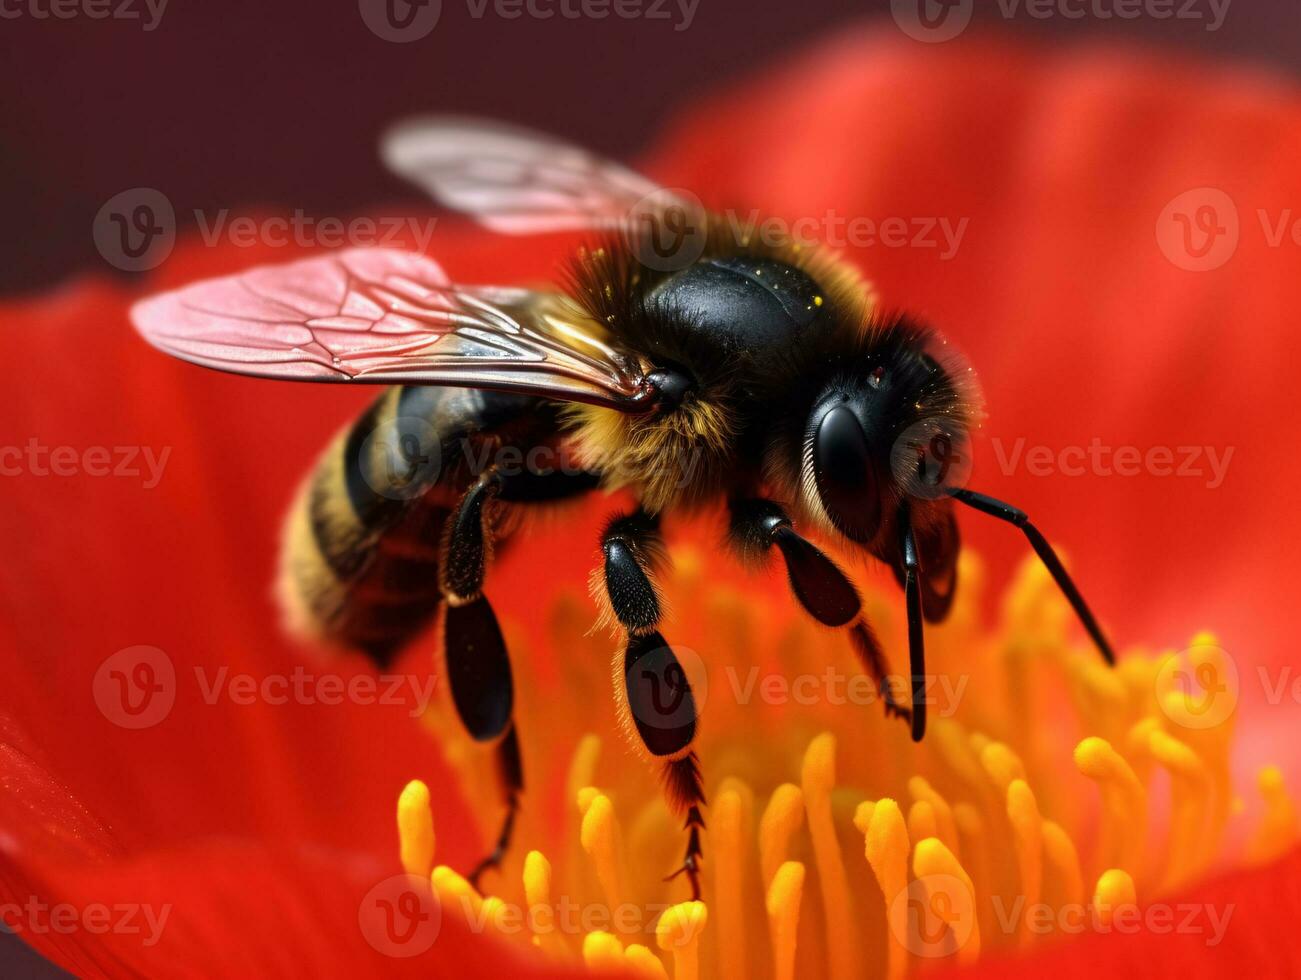 Bee collecting nectar from red poppy flower with fuzzy body and delicate wings in sharp focus against blurred background - AI generated photo